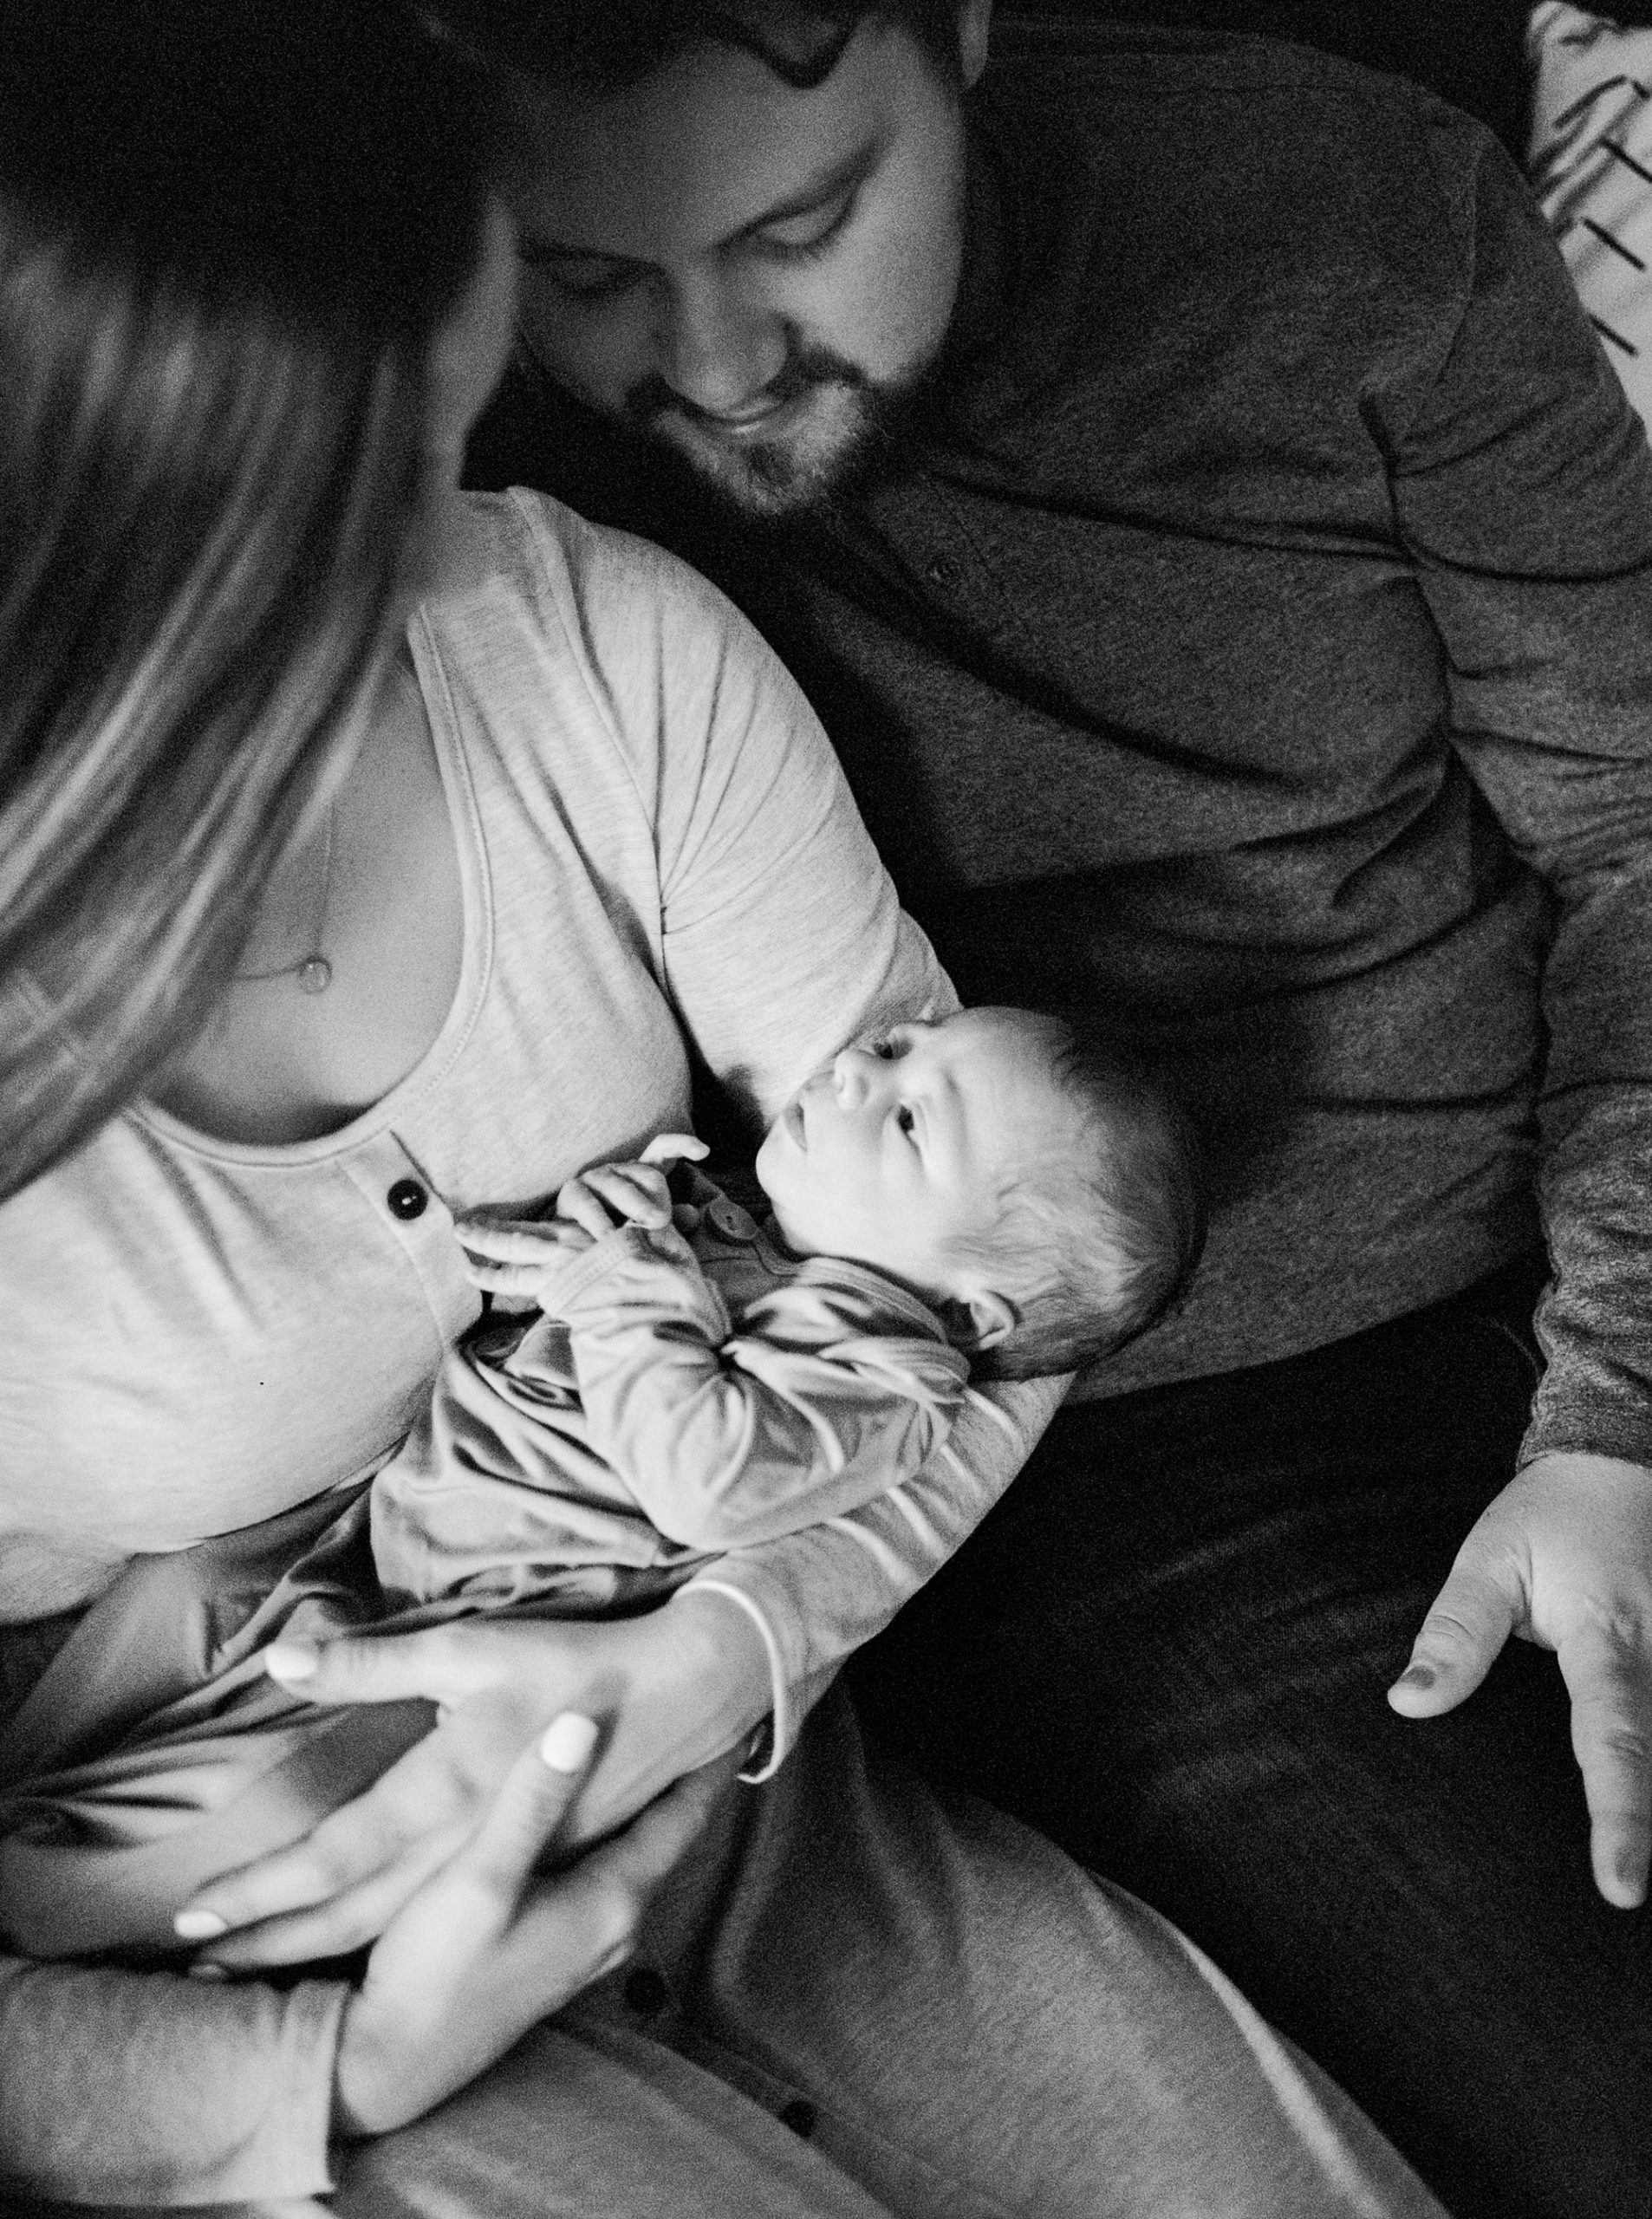 parents look at new baby boy during In Home Lifestyle Newborn photos